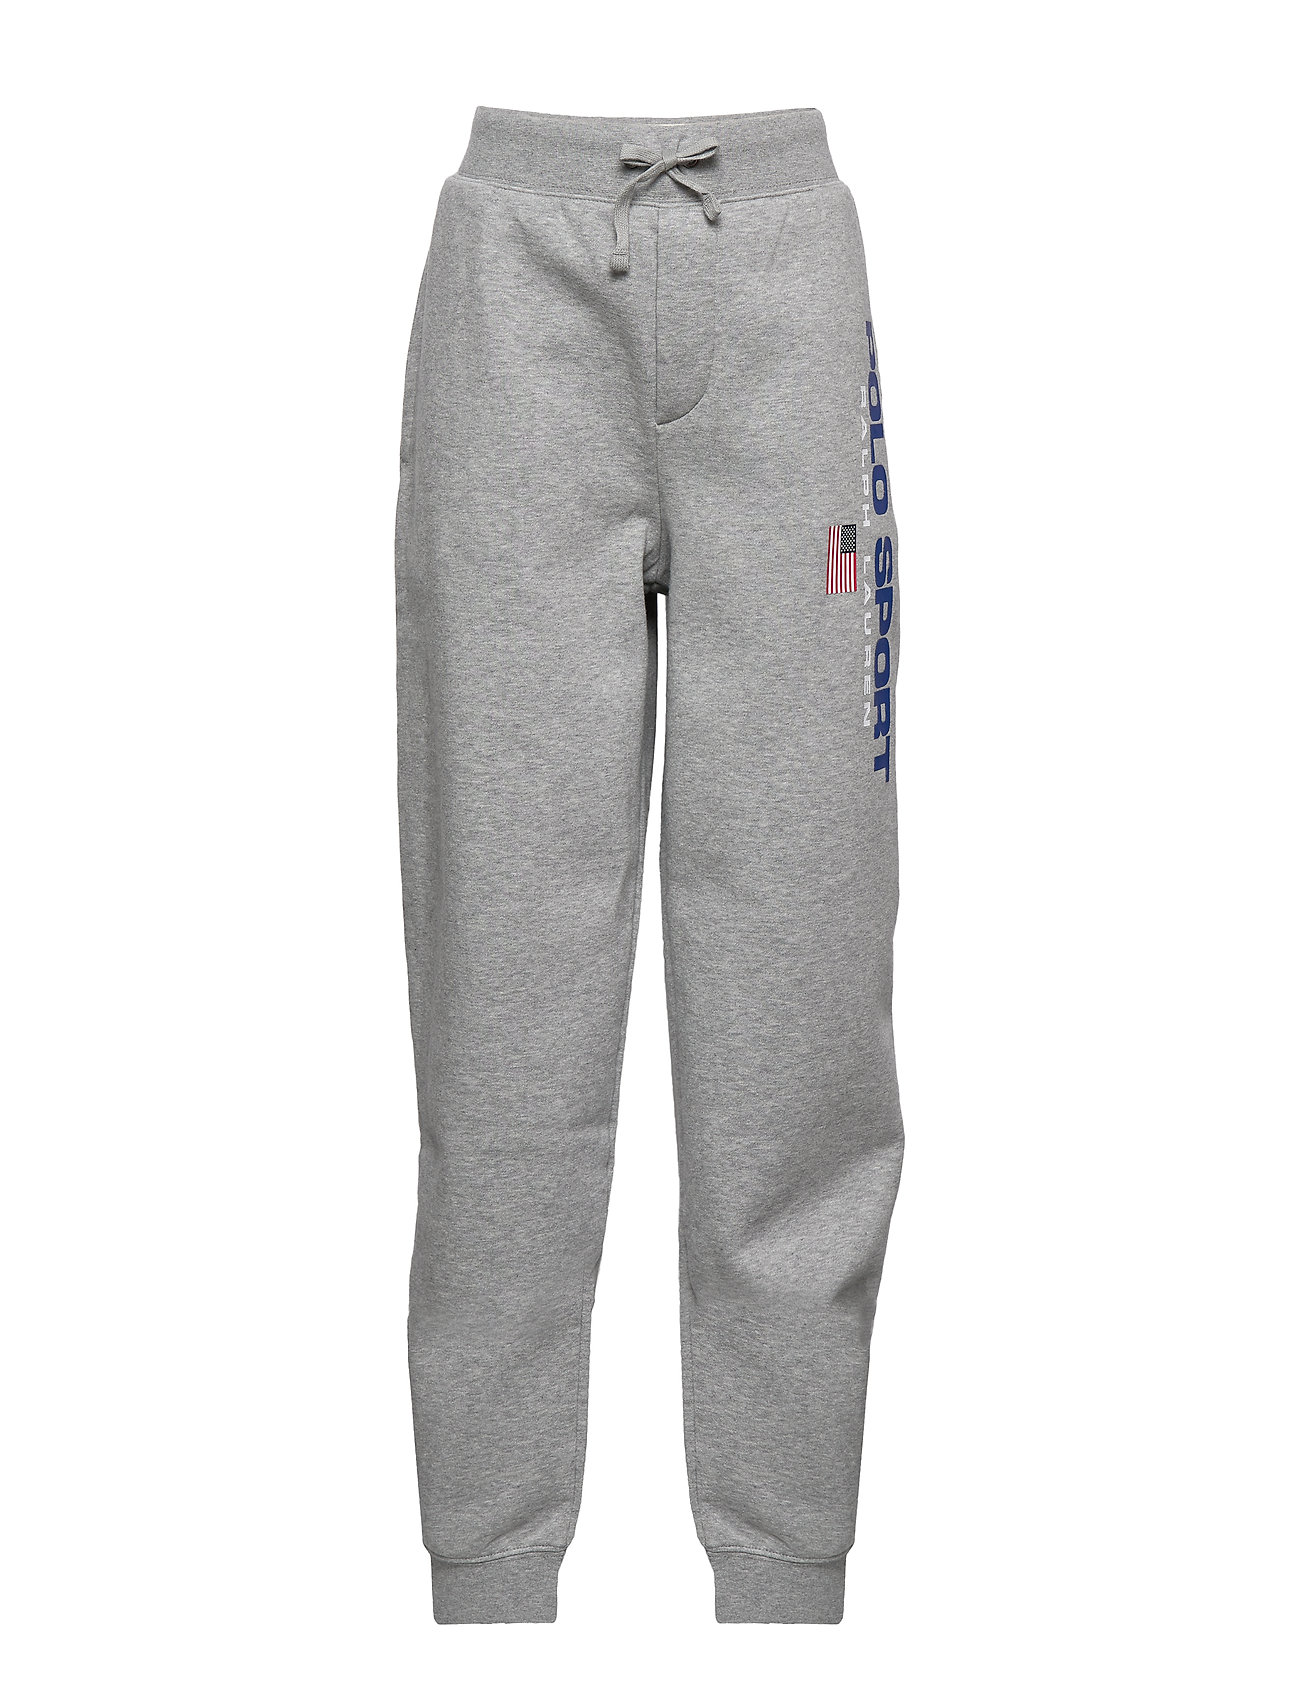 polo sport trousers